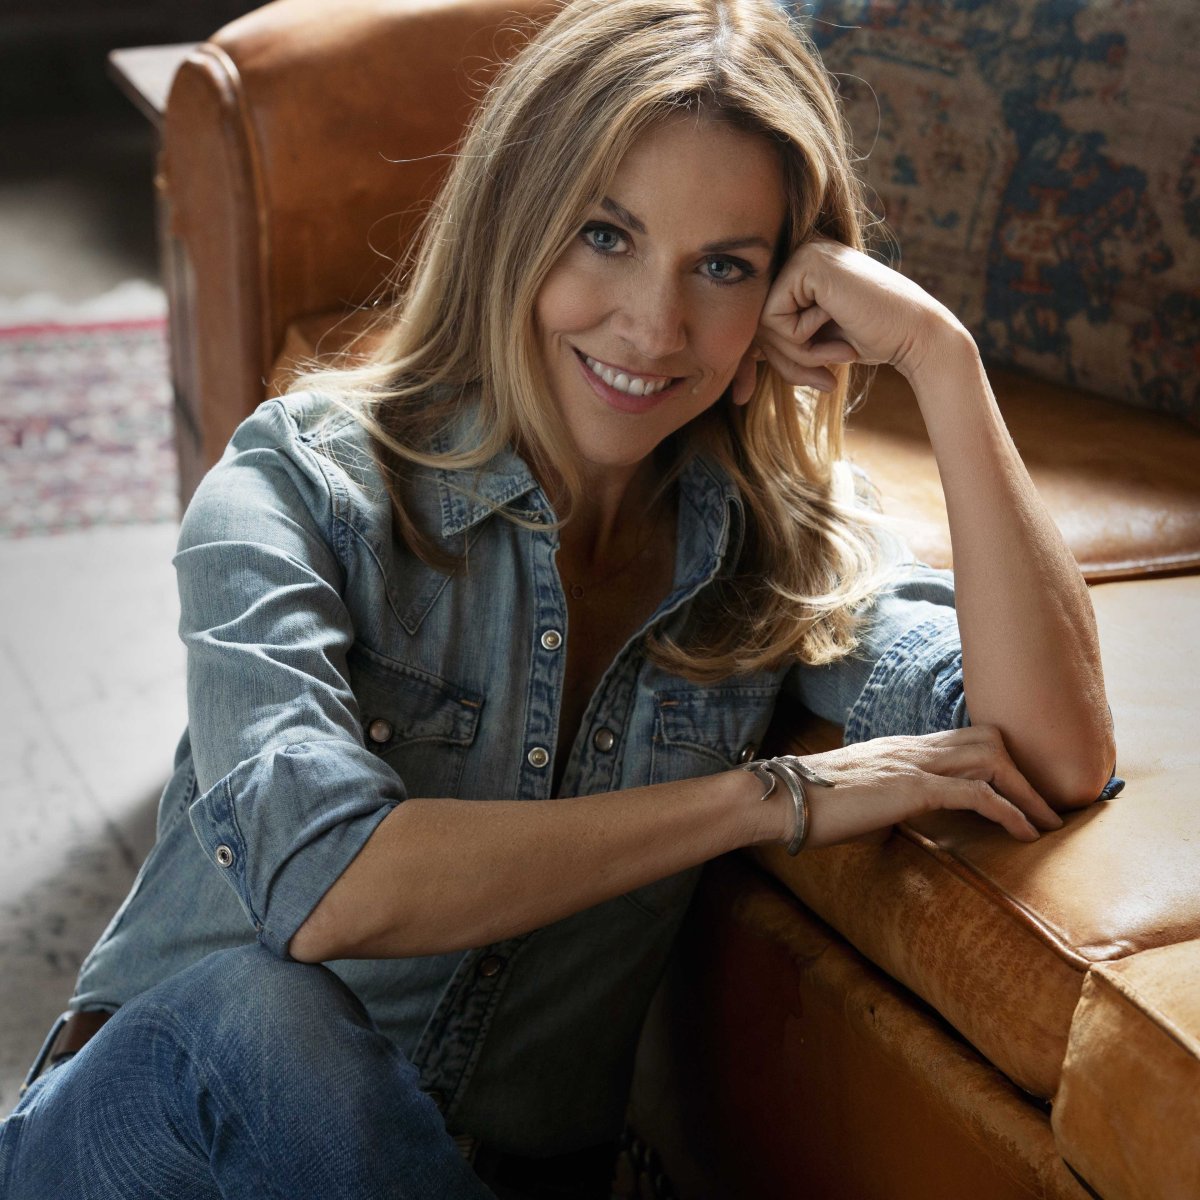 American musician Sheryl Crow is a white woman with blonde hair wearing a button-down shirt, sitting on the floor and smiling toward the camera. 